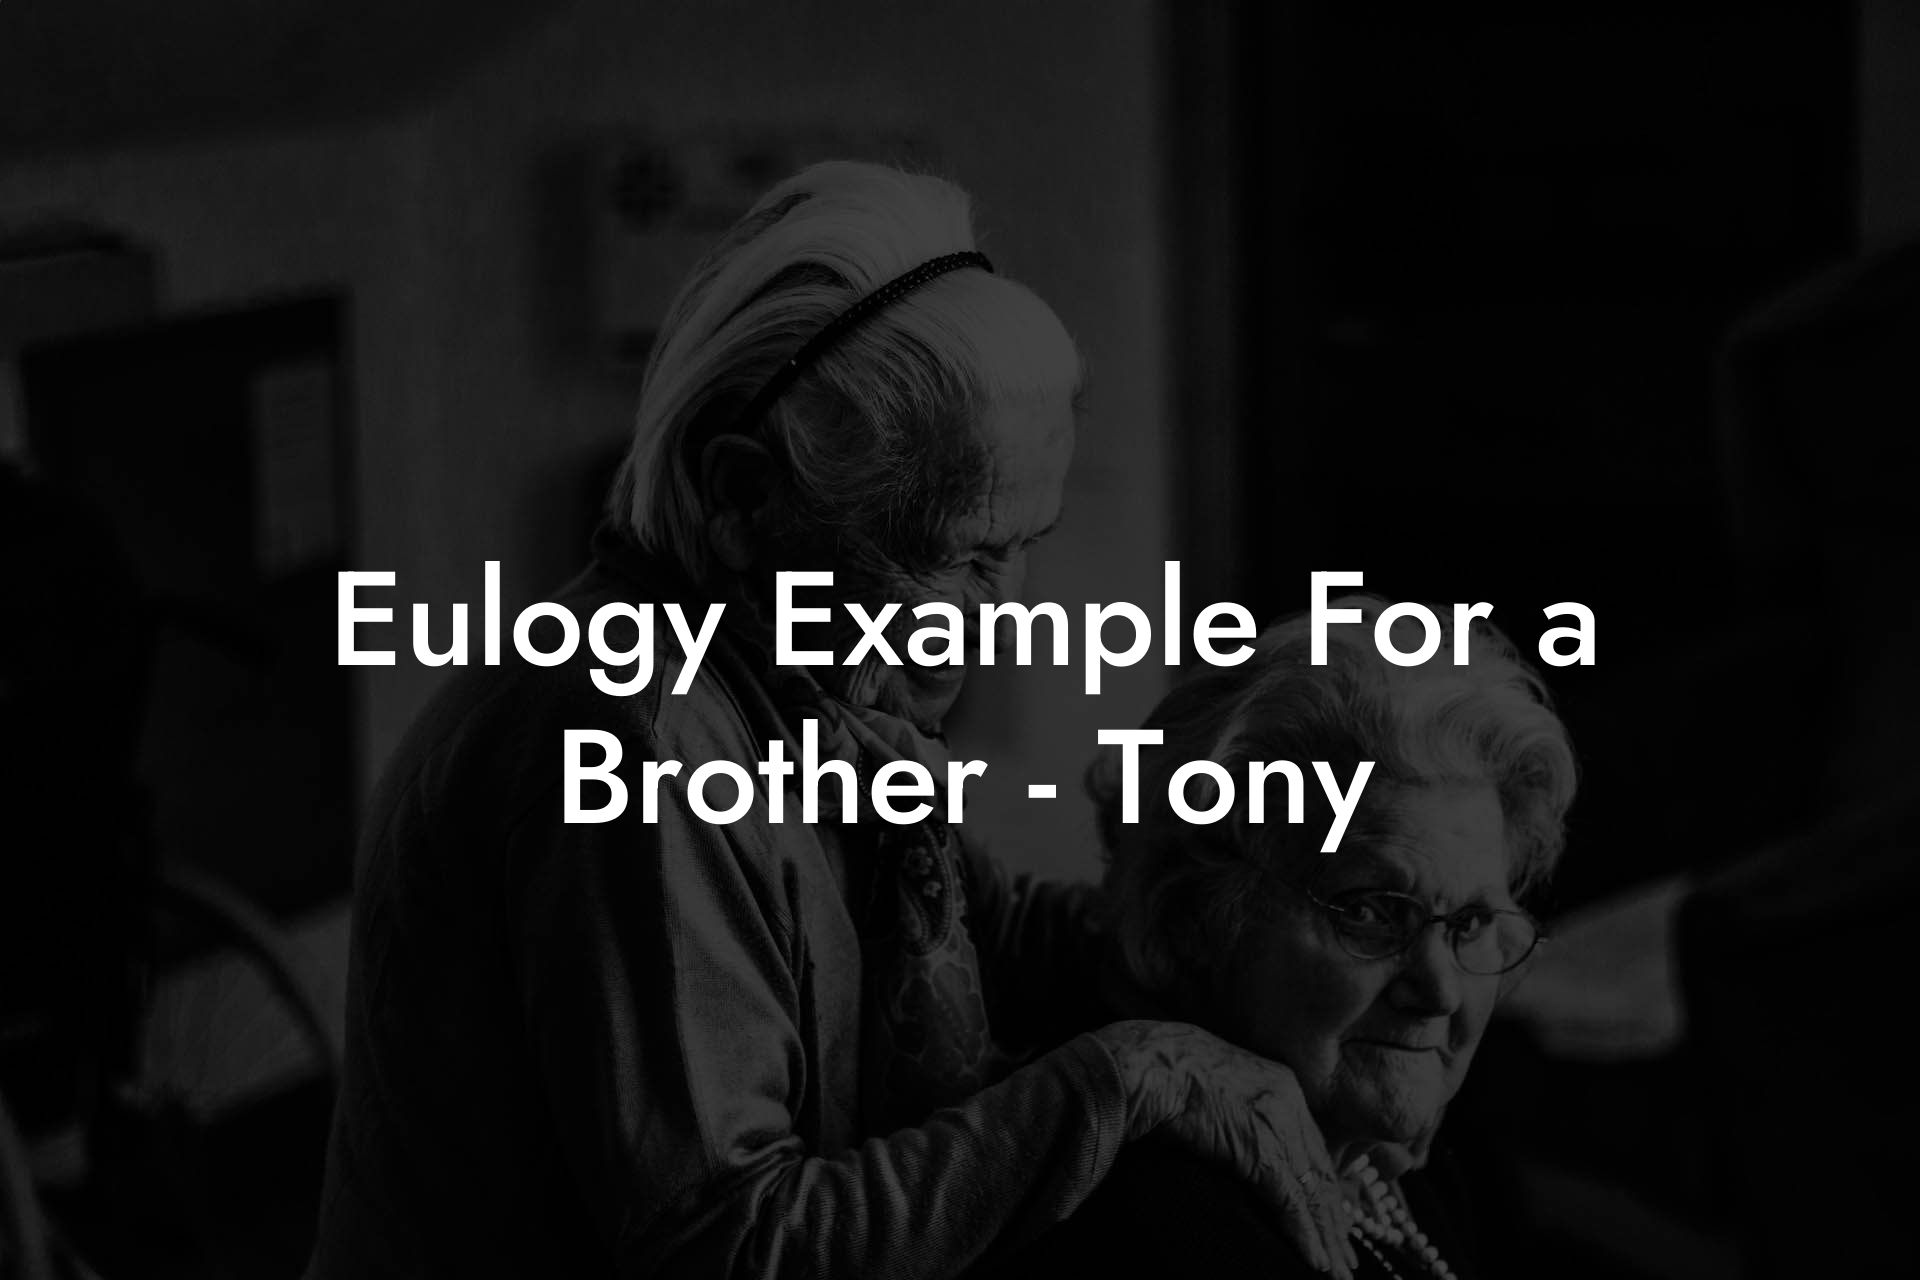 Eulogy Example For a Brother - Tony